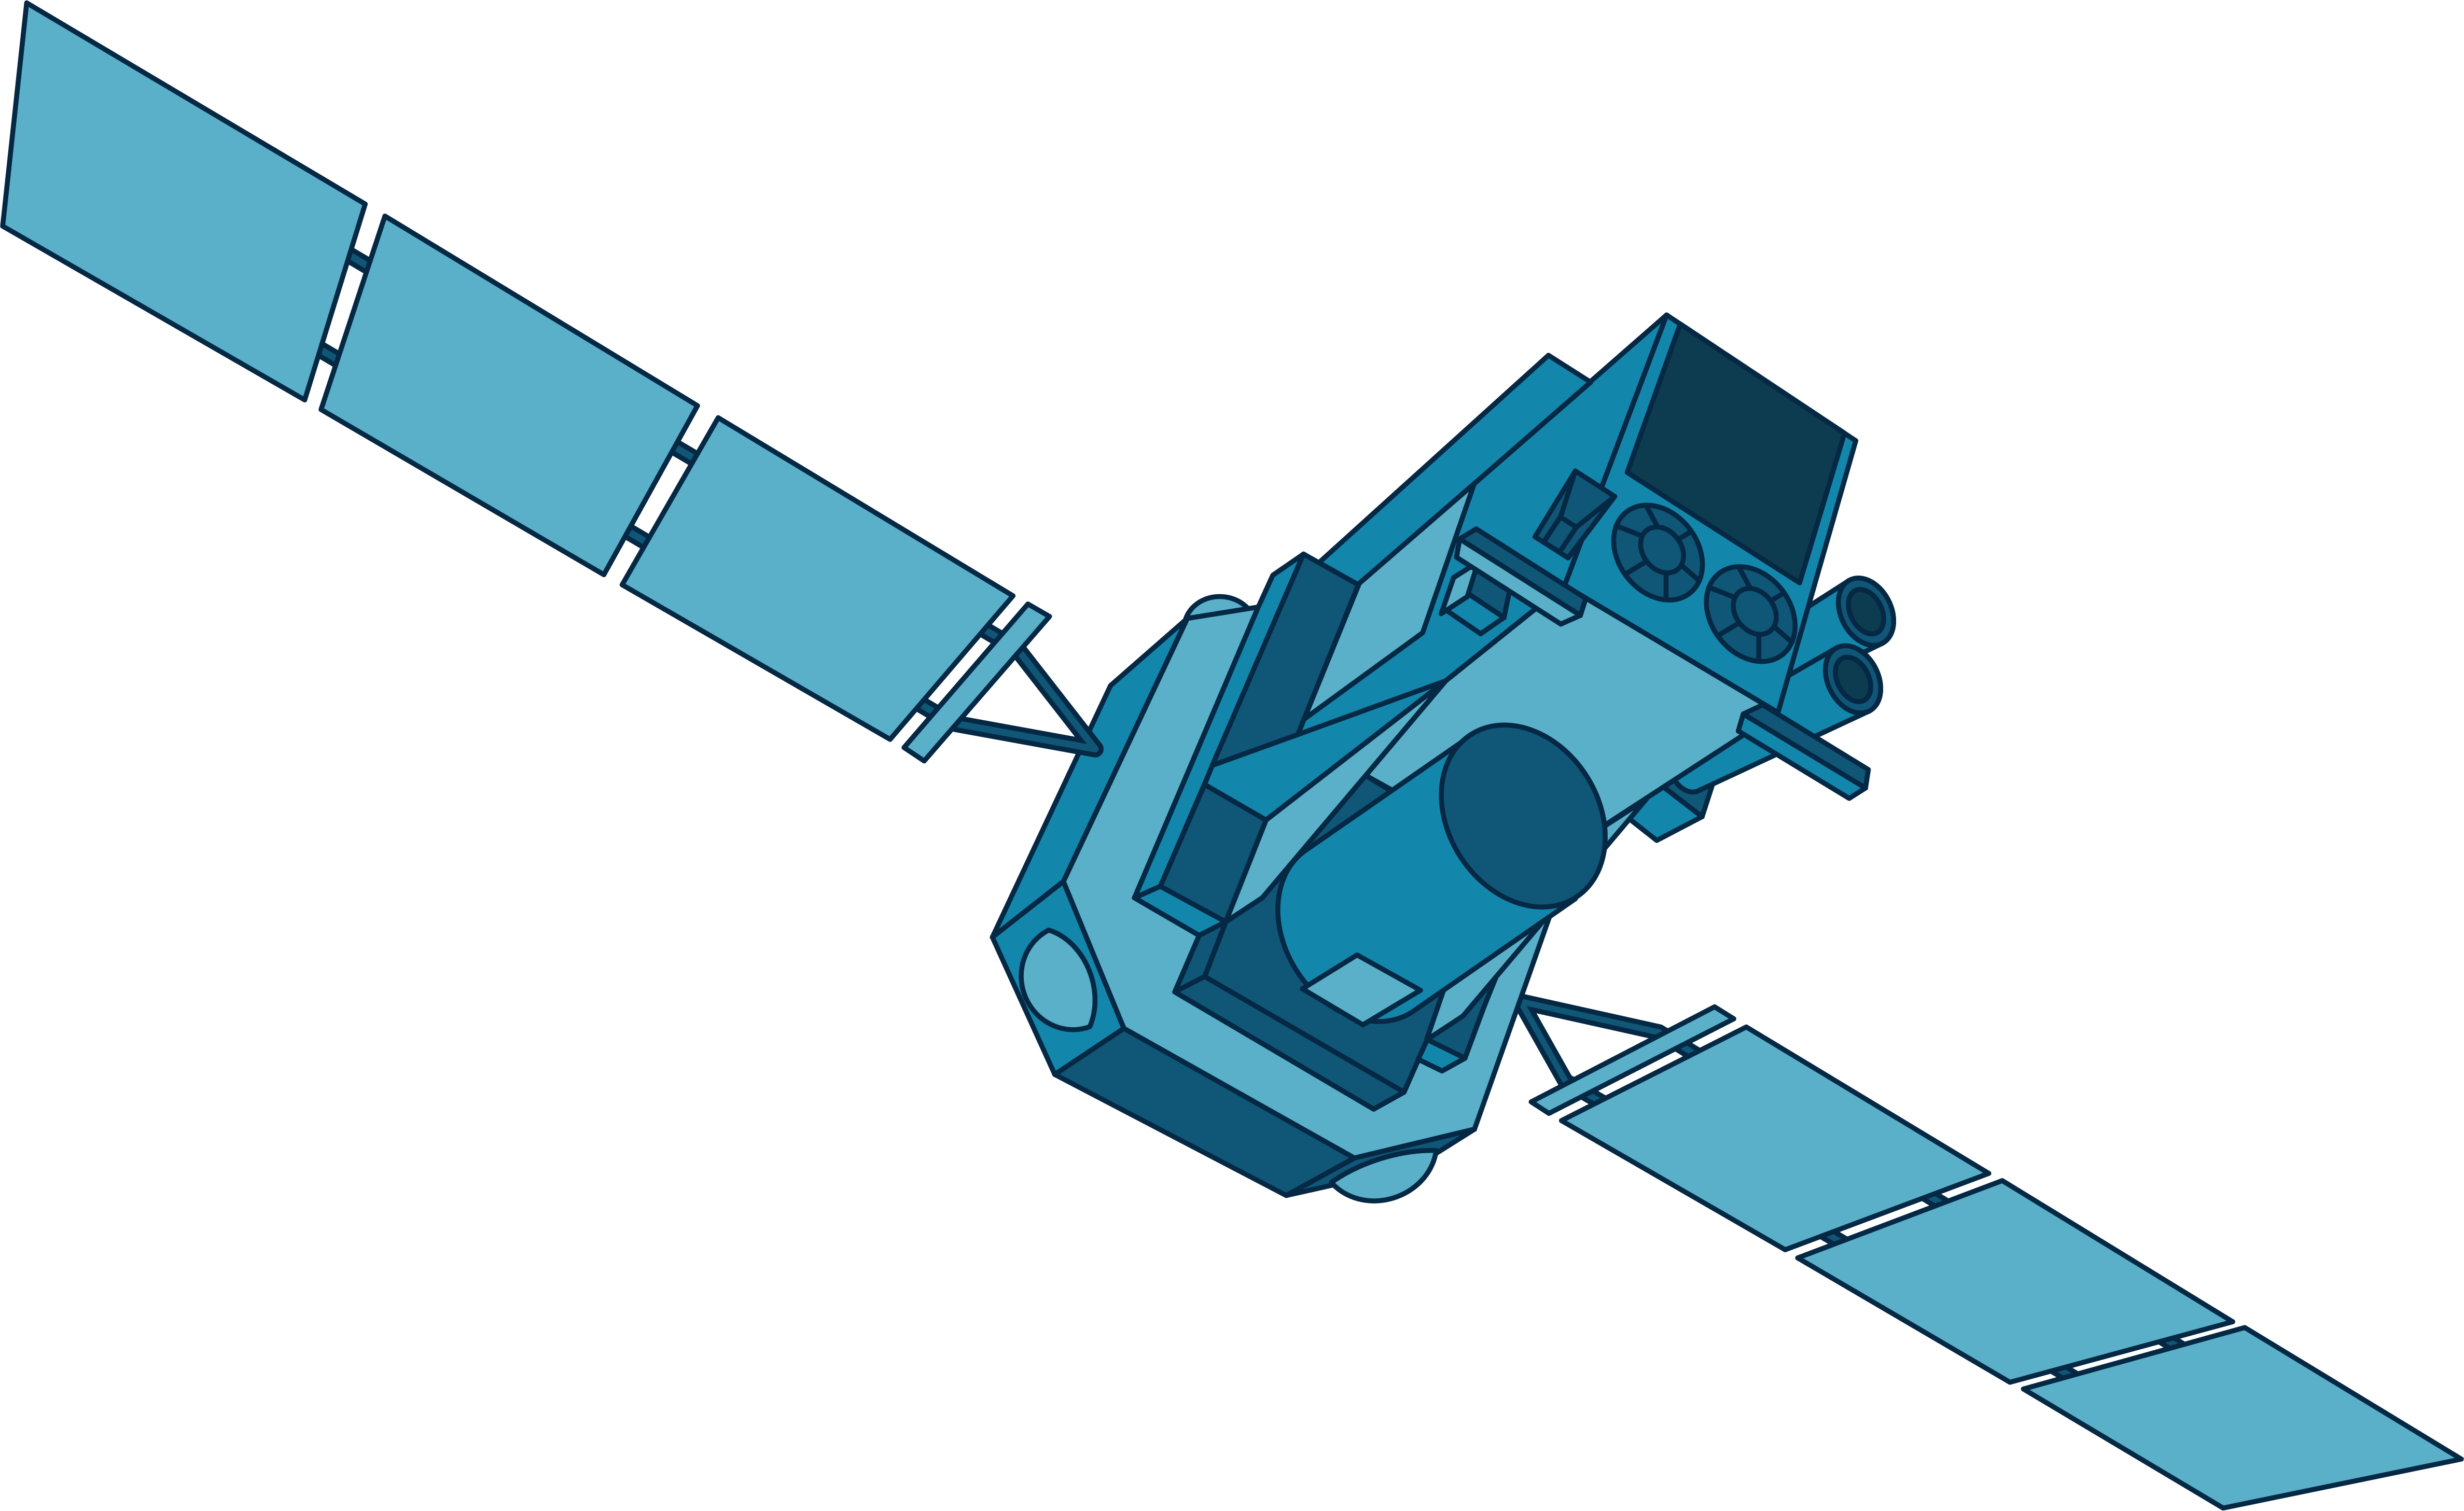 This INTEGRAL illustration shows the space telescope in shades of blue. The main body of the spacecraft is made of an octagonal base. A long rectangle extends from the base above a cylinder. Solar panels extend from either side of the base.